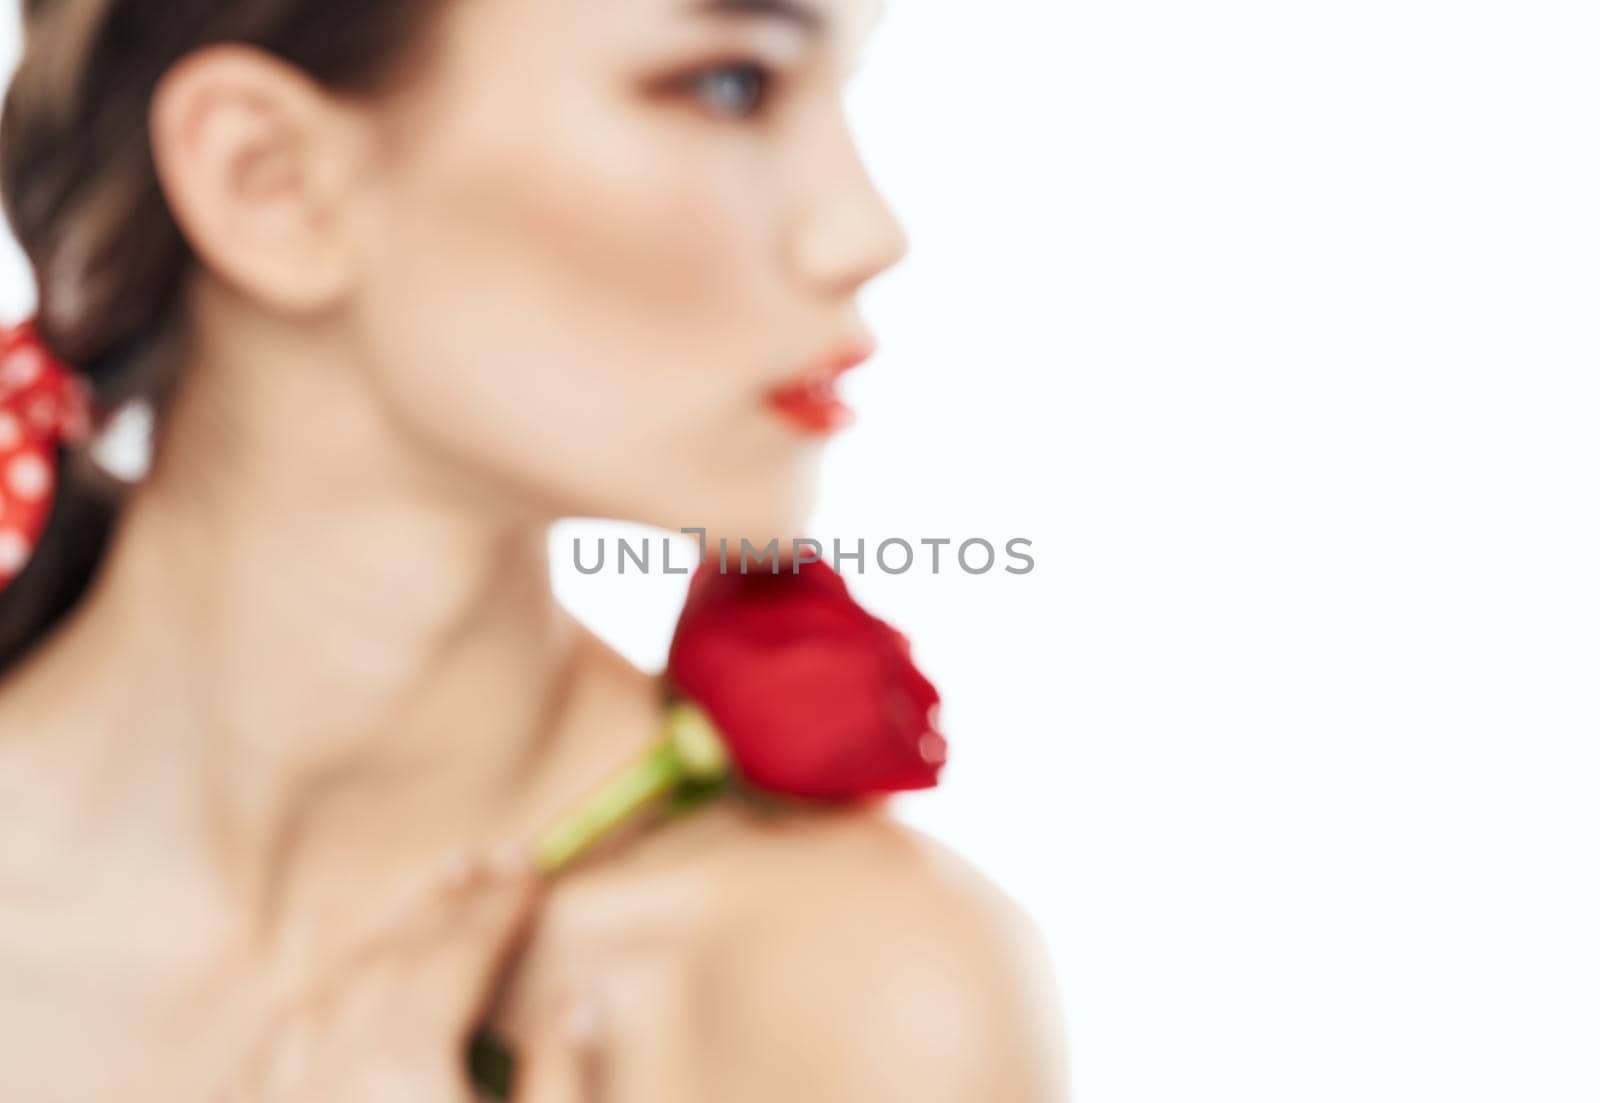 Charming people with bare shoulders red rose makeup eyeshadow. High quality photo